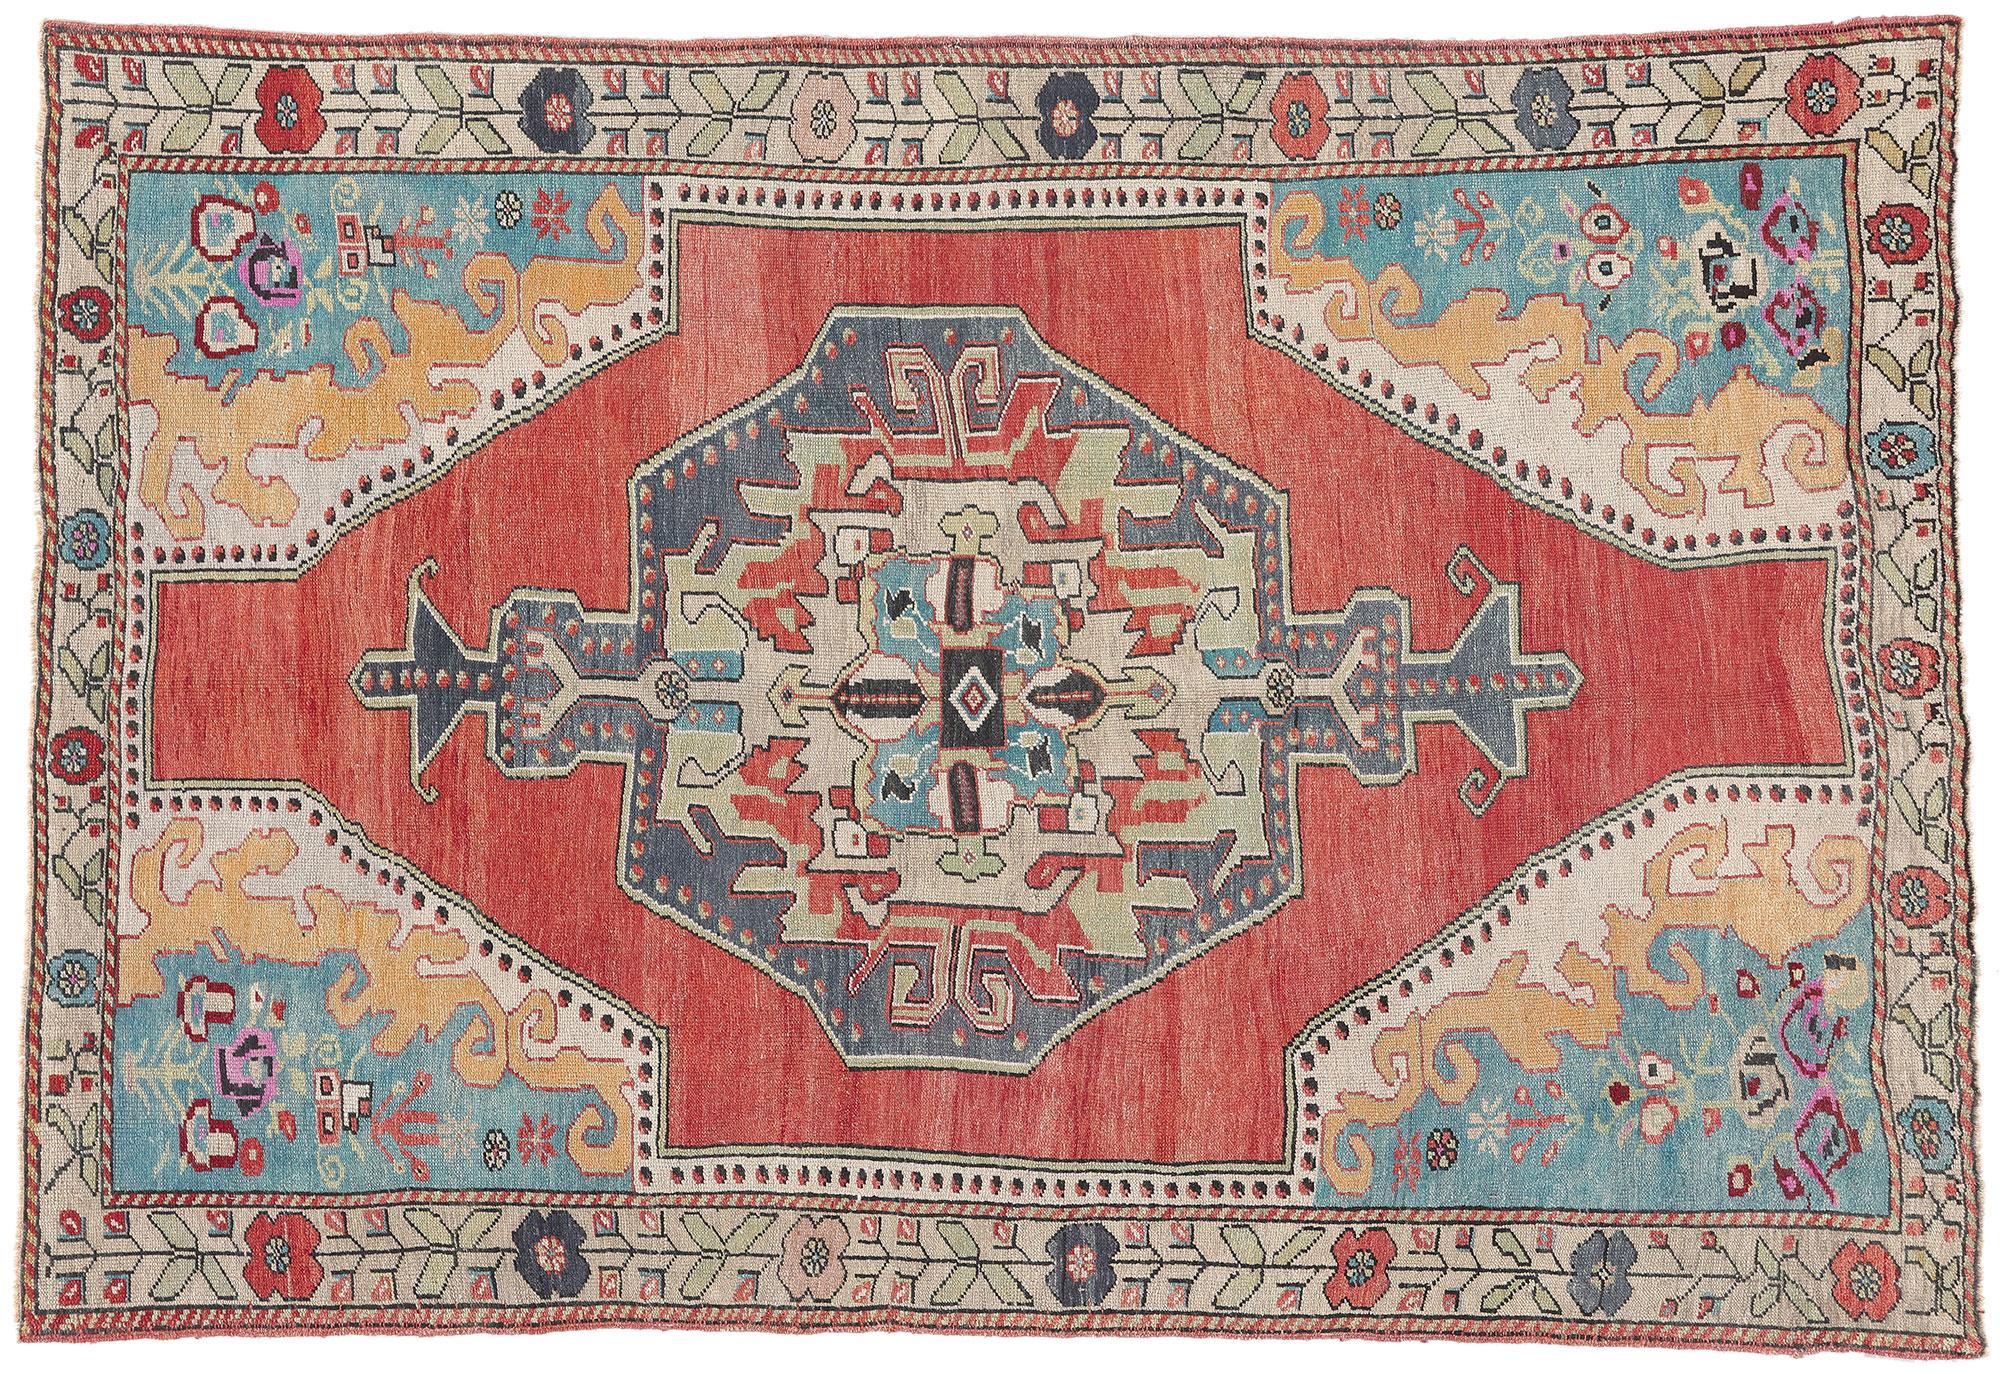 53865 Vintage Turkish Oushak Rug, 05'00 x 07'05. Emanating boho chic style with incredible detail and texture, this hand knotted wool vintage Turkish Oushak rug is a captivating vision of woven beauty. The medallion design and lively colors woven